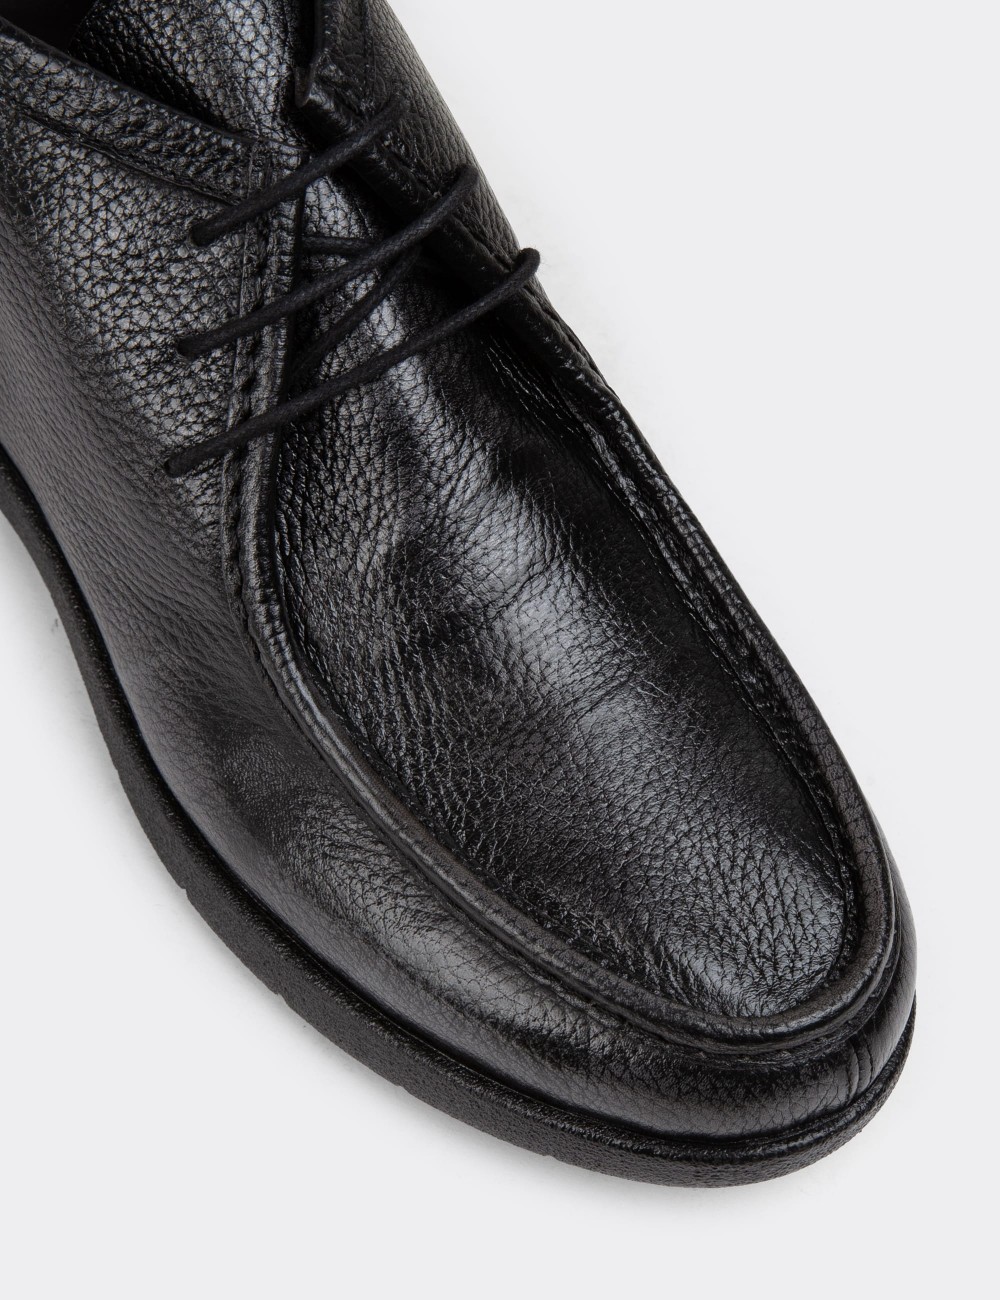 Anthracite Leather Boots - 01972MANTC01